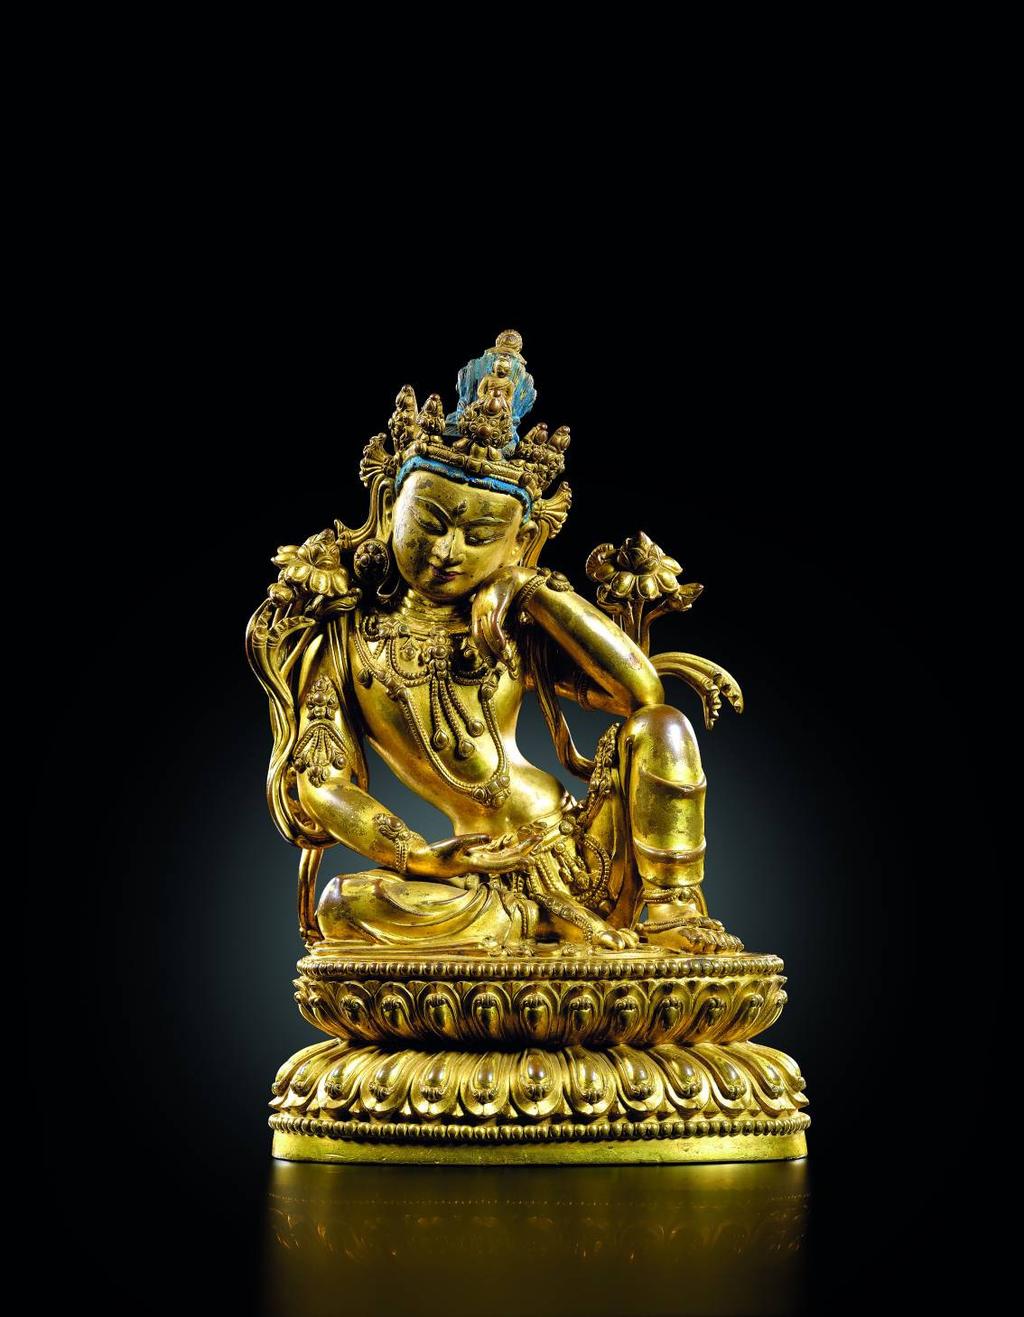 Ming Imperial Bronzes from the Collection of Tuyet Nguyet and Stephen Markbreiter An Exceptionally Rare and Important